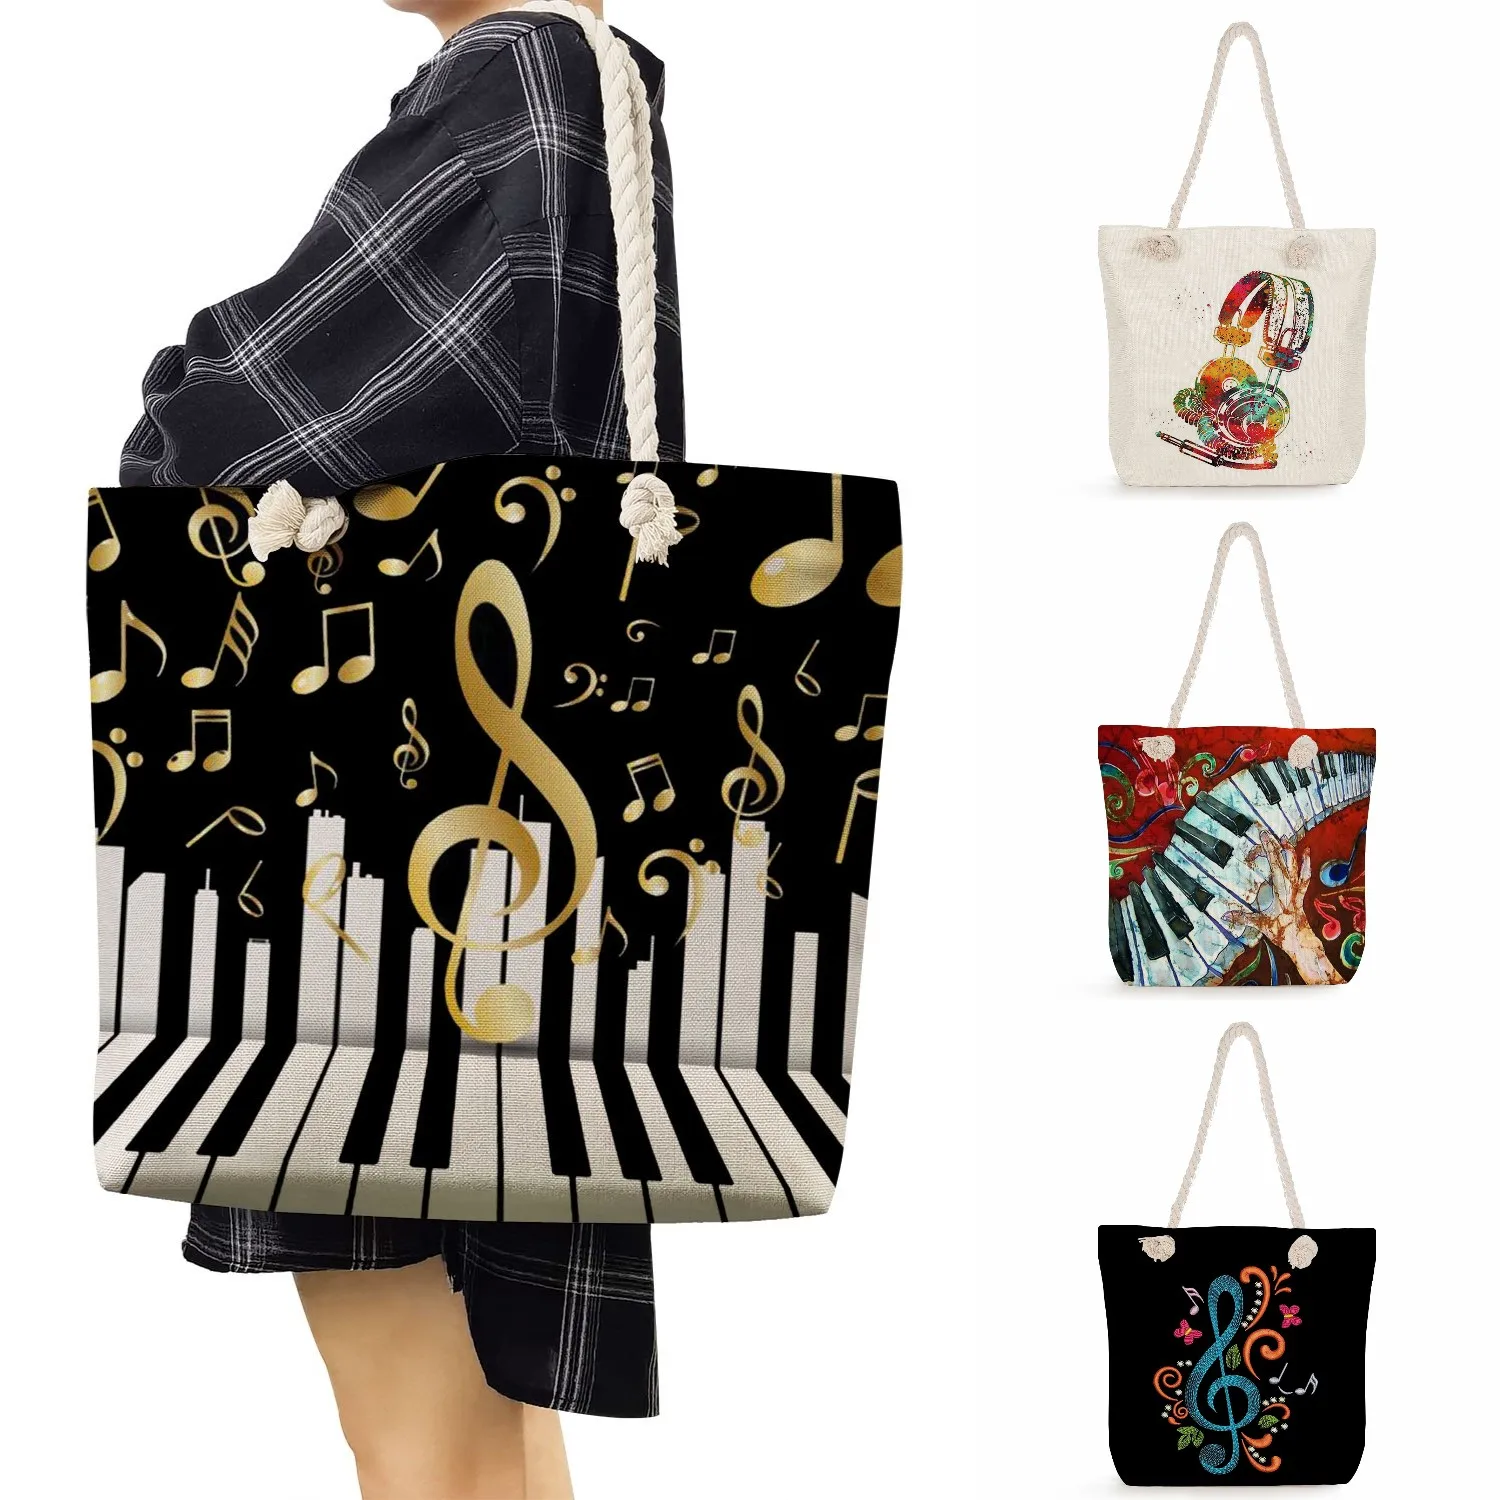 Guitar Piano Graphic Outdoor Shoulder Bags Traveling Music Note Print With Tote Bags High Capacity Handbags For Women Fashion